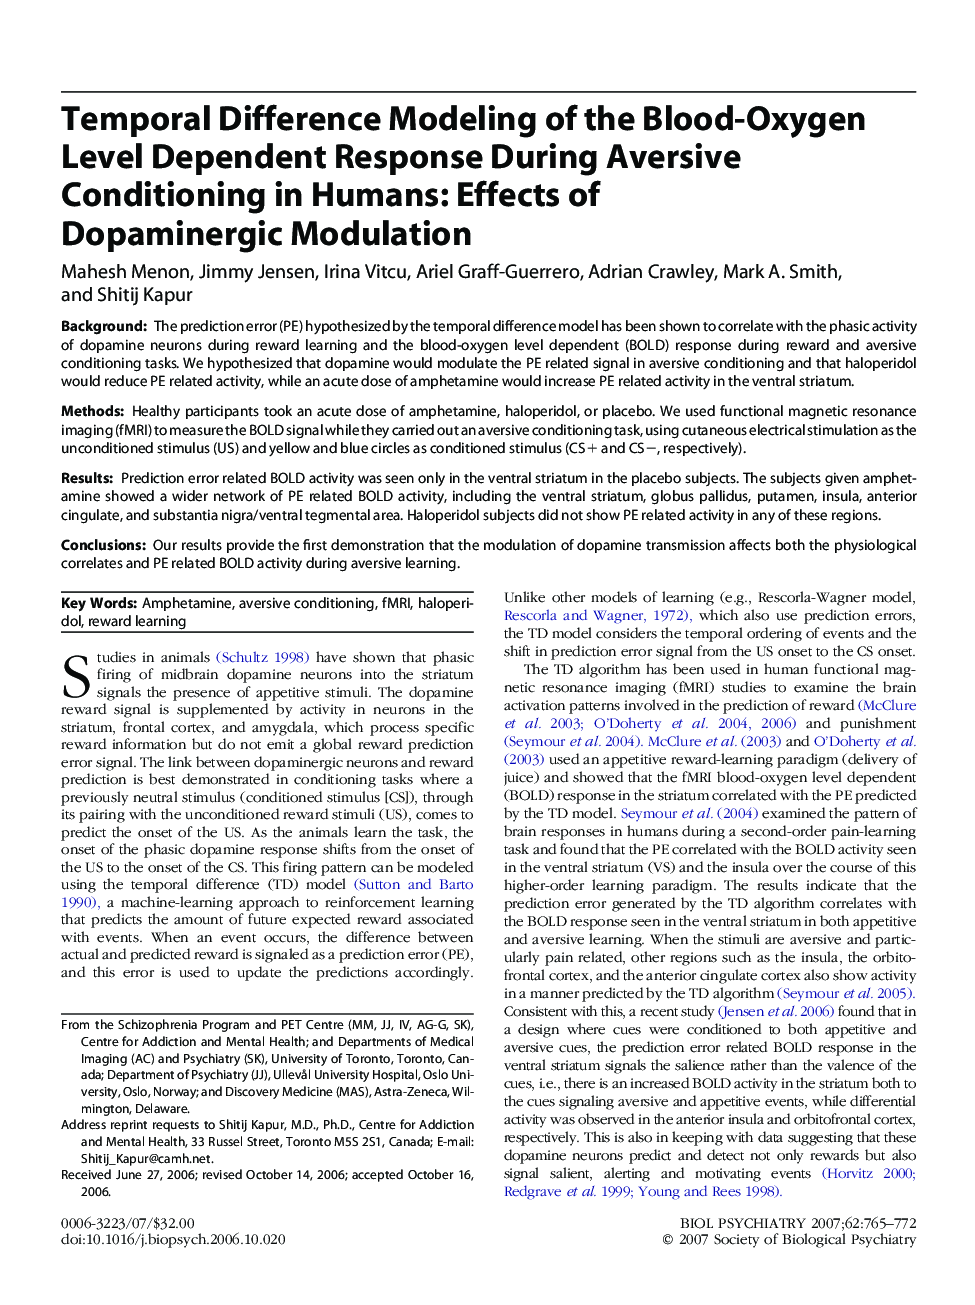 Temporal Difference Modeling of the Blood-Oxygen Level Dependent Response During Aversive Conditioning in Humans: Effects of Dopaminergic Modulation